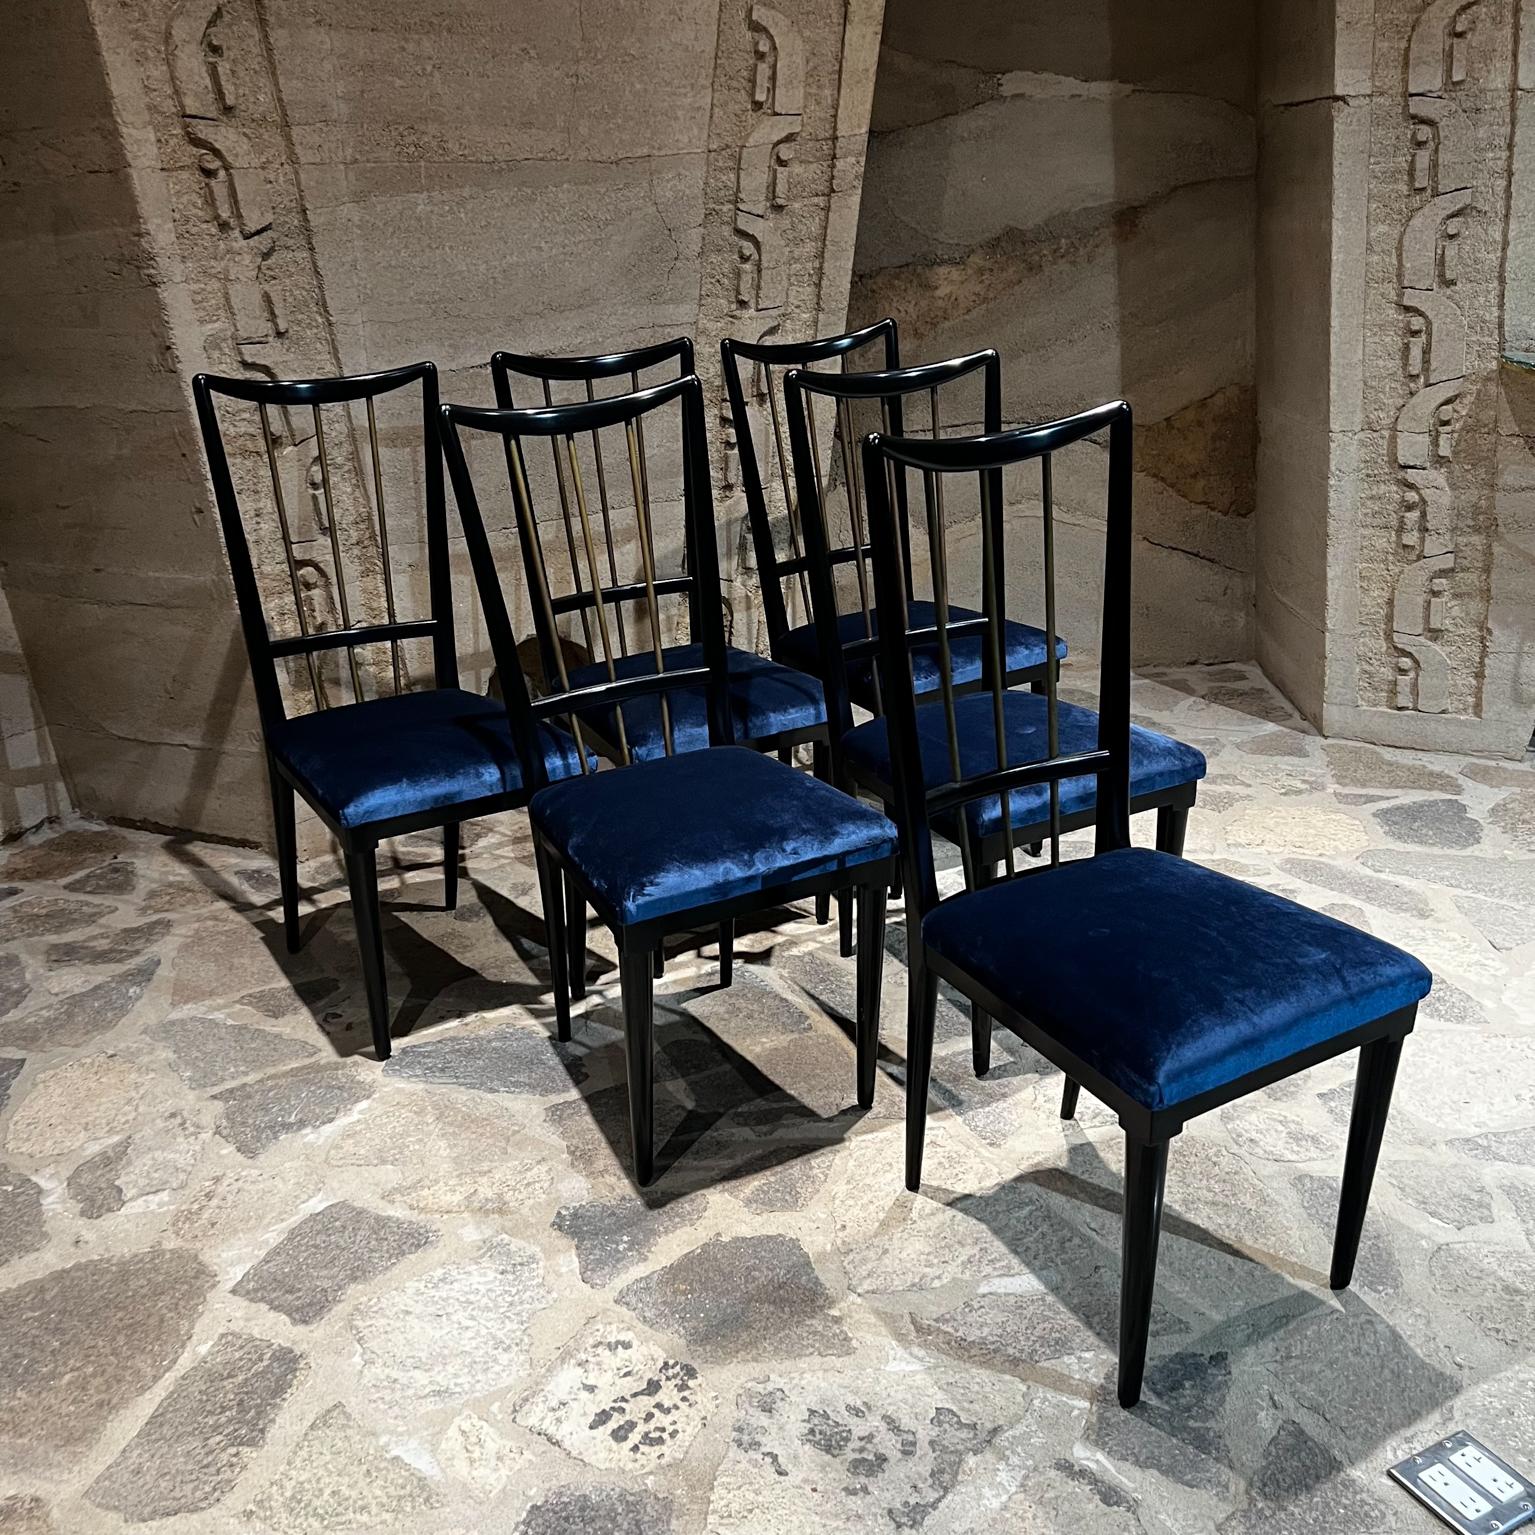 Sophisticated dining set Ebonized Mahogany wood dining table 
Six blue velvet chairs
Mexico circa 1950s
Attributed to Eugenio Escudero. Unmarked.
Set includes six dining chairs and an oval shaped dining table.
Mahogany Wood ebonized with black